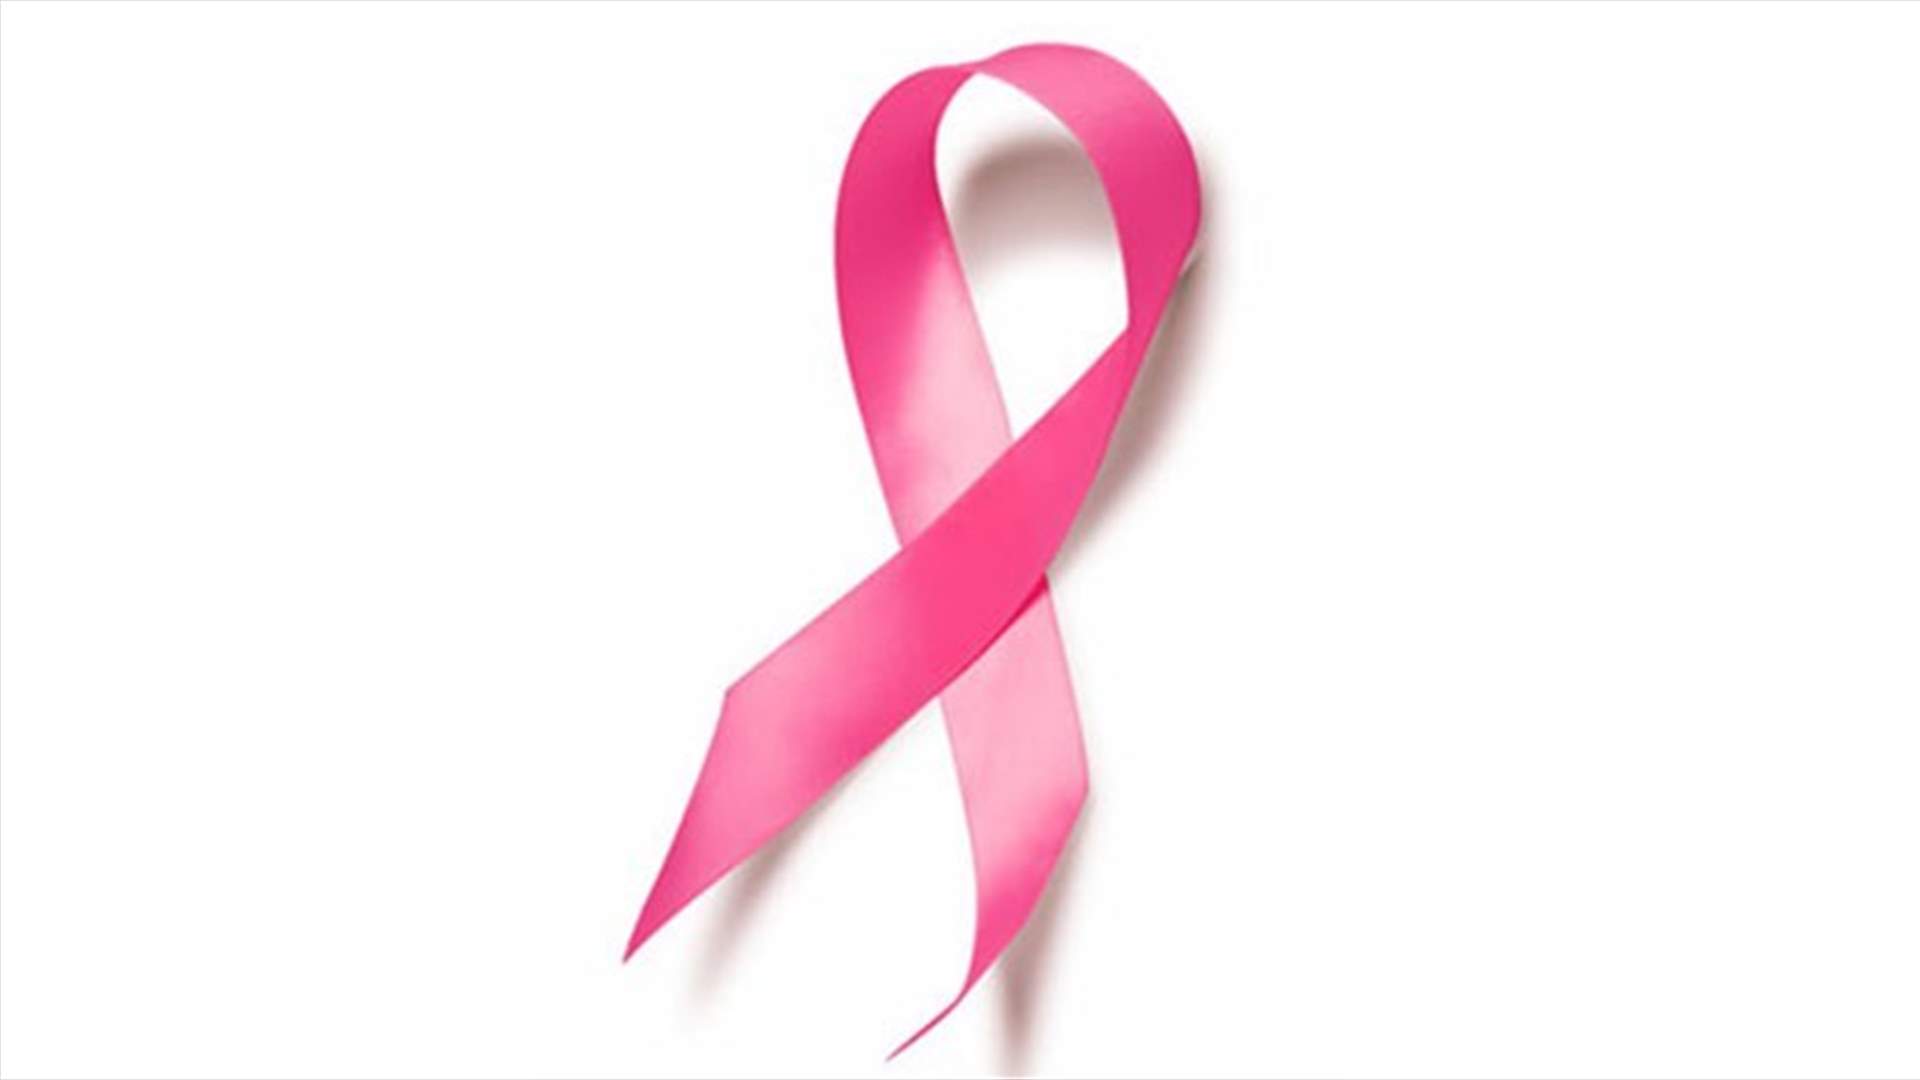 [PHOTO] Unusual breast cancer awareness campaign by the Ministry of Health 